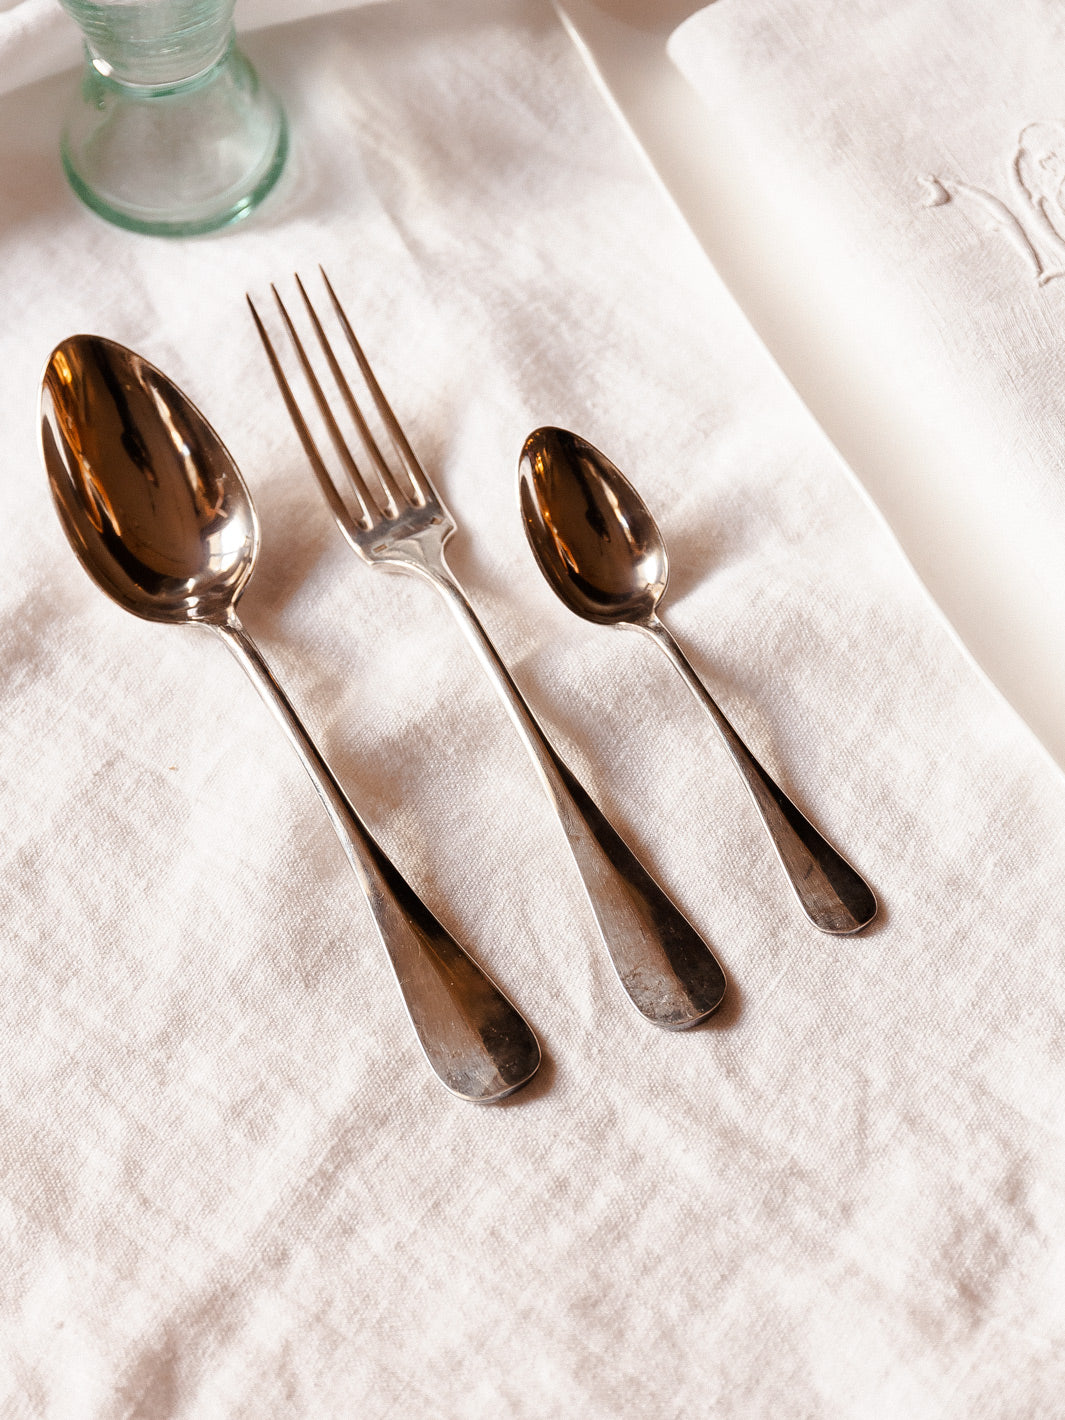 French silver metal cutlery from the 20s for 12 people